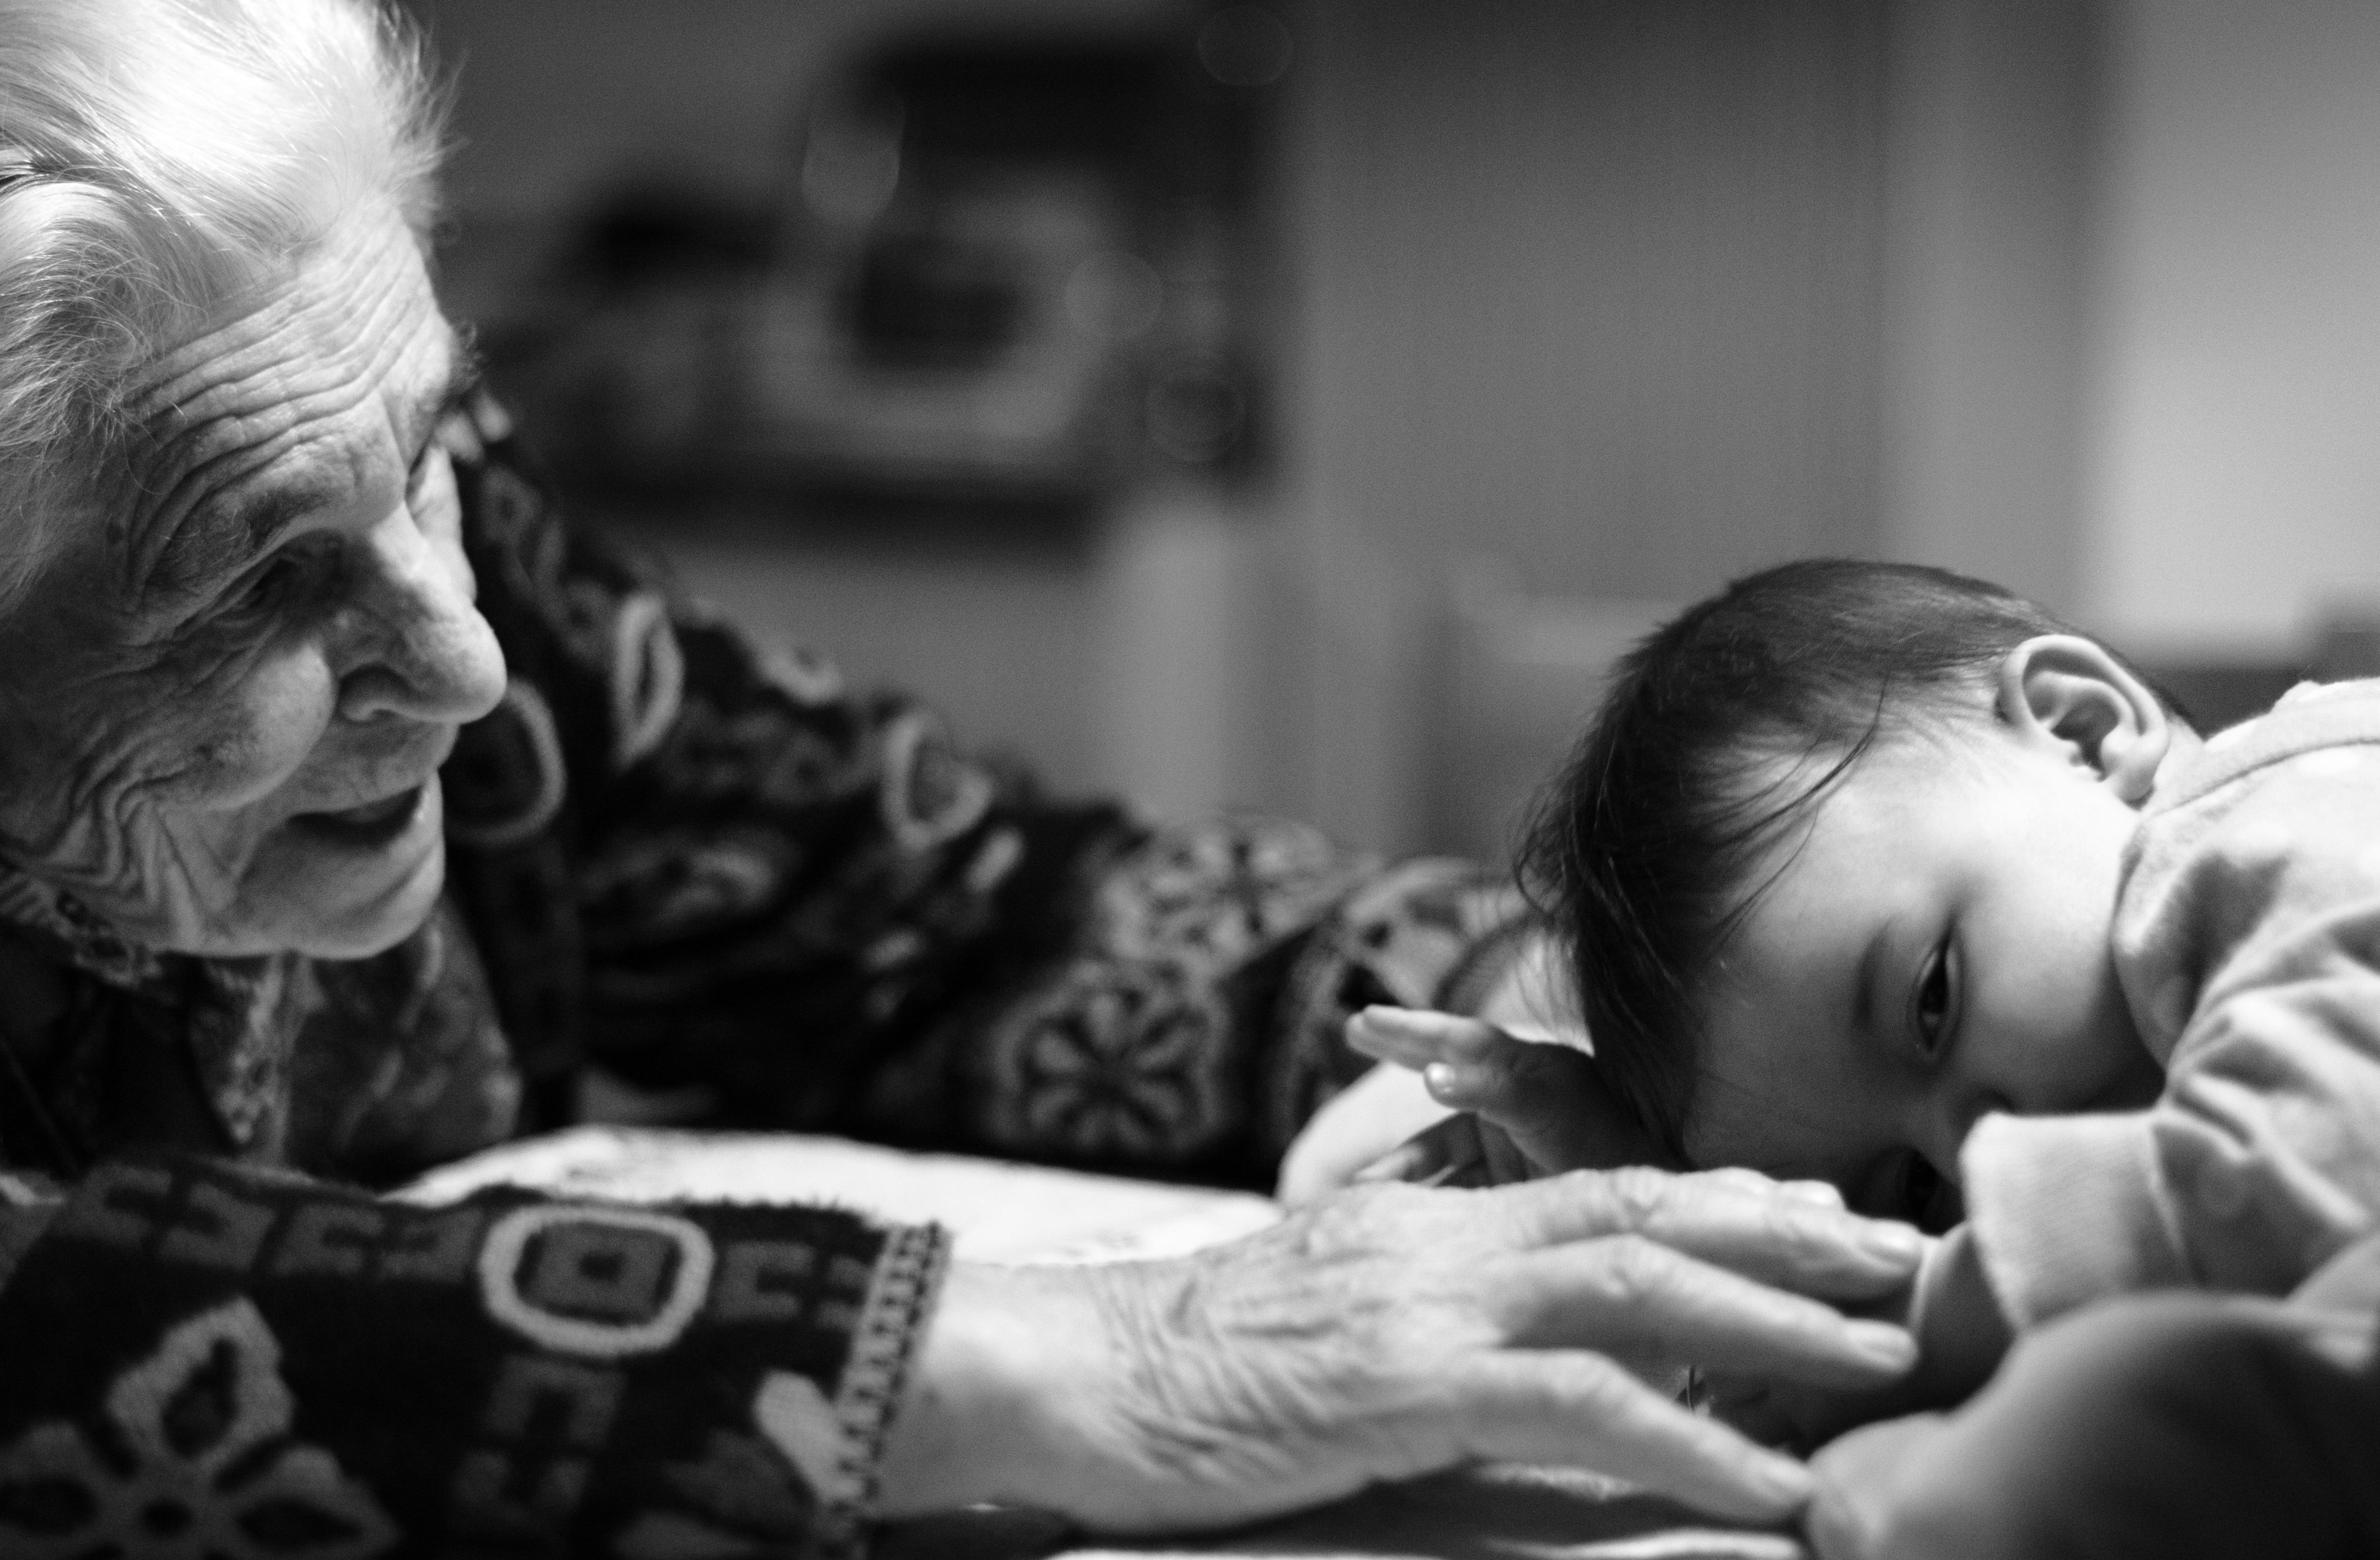 The old lady tells the staff the OP attempted to kidnap her grandson | Photo: Unsplash 